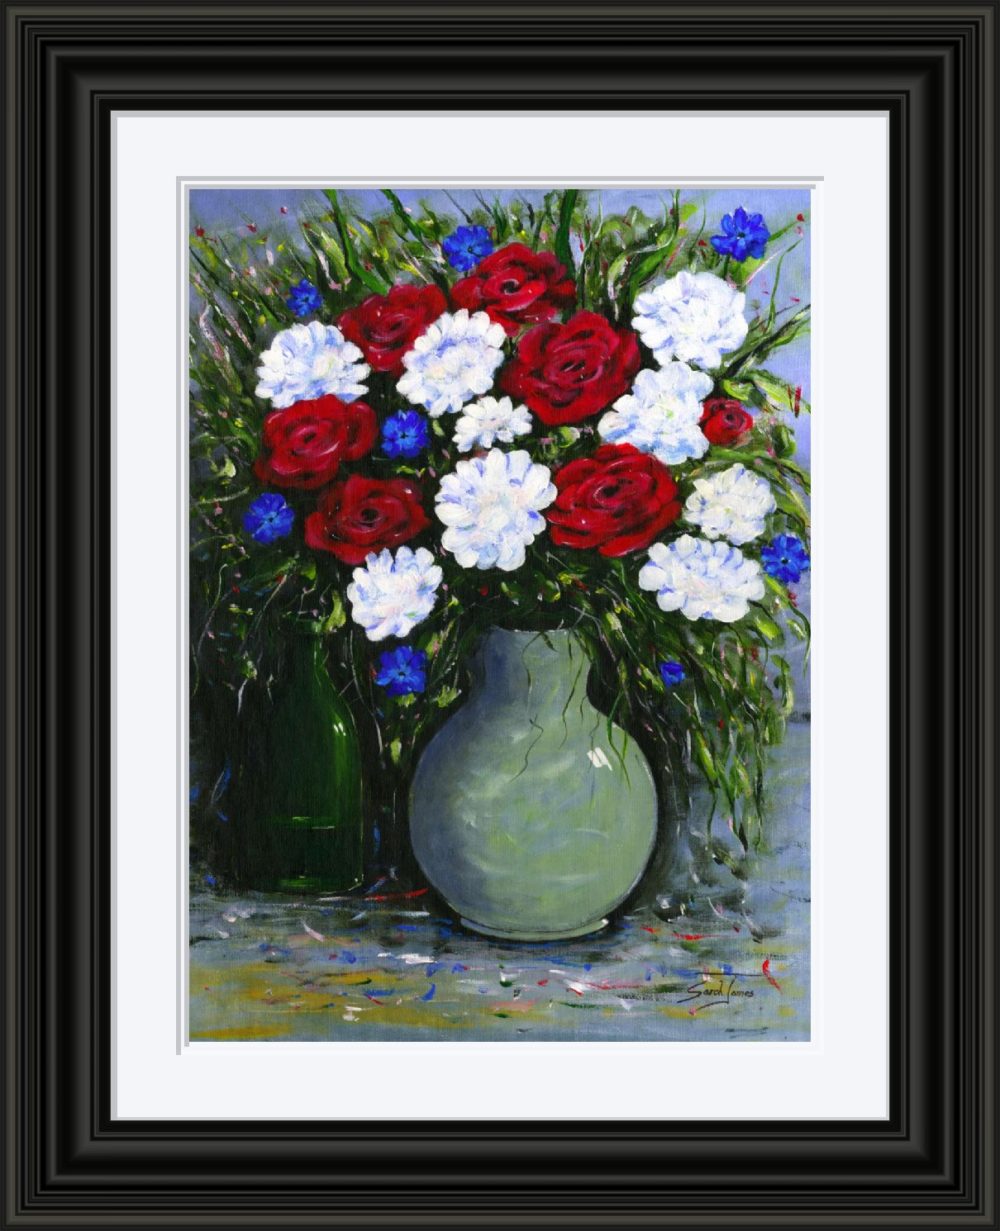 Cornflowers and Roses in Black Frame